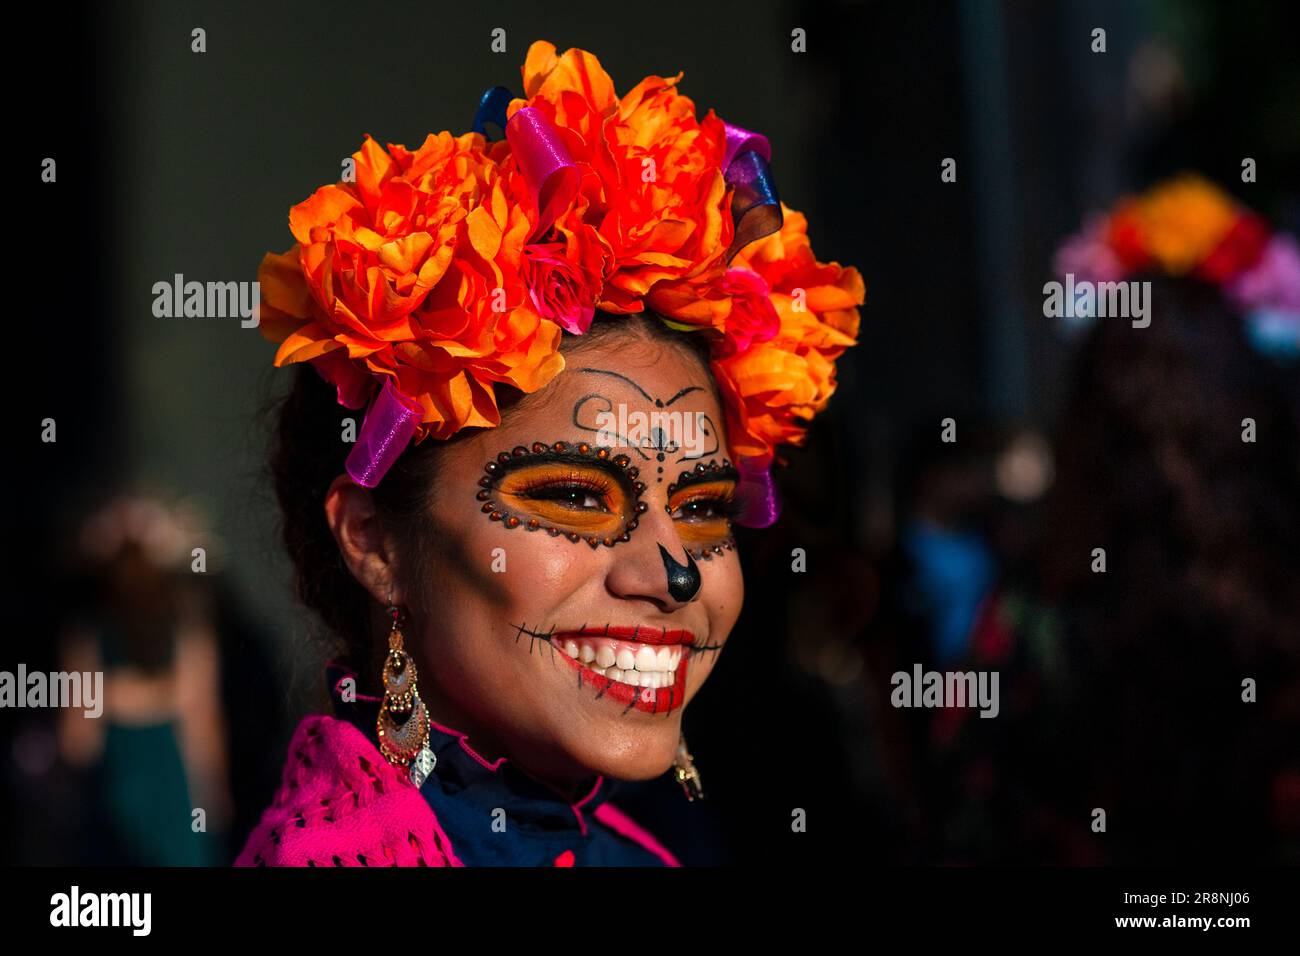 A young Mexican woman, dressed as La Catrina, takes part in the Day of the Dead festivities in Morelia, Mexico. Stock Photo